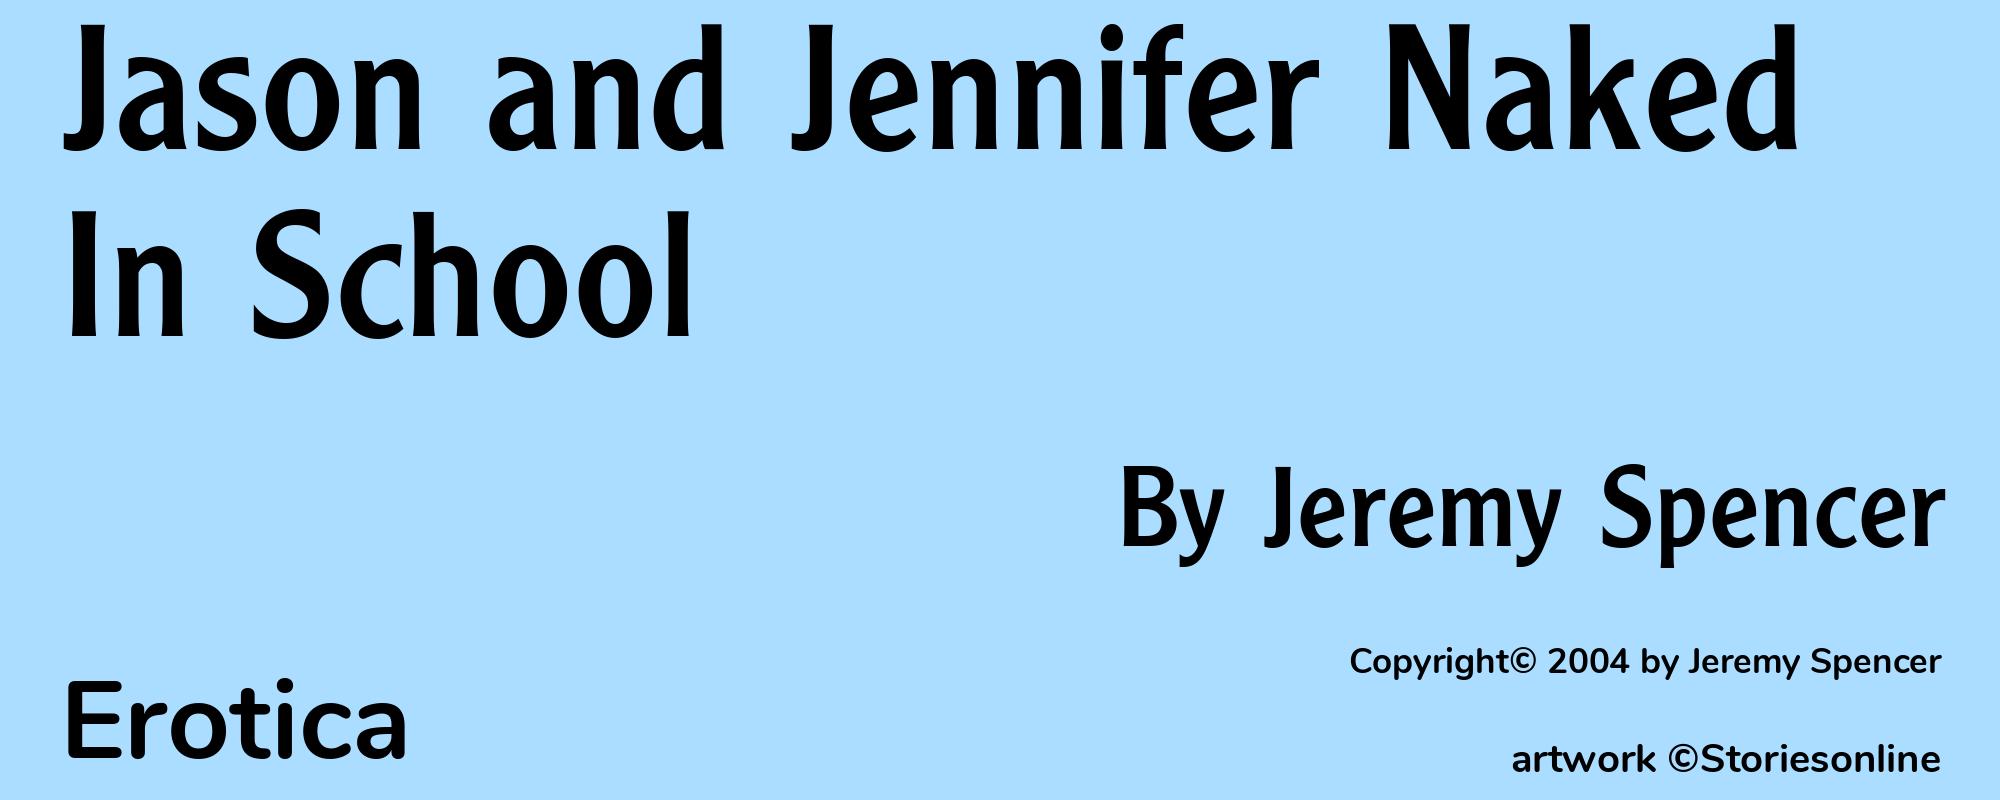 Jason and Jennifer Naked In School - Cover